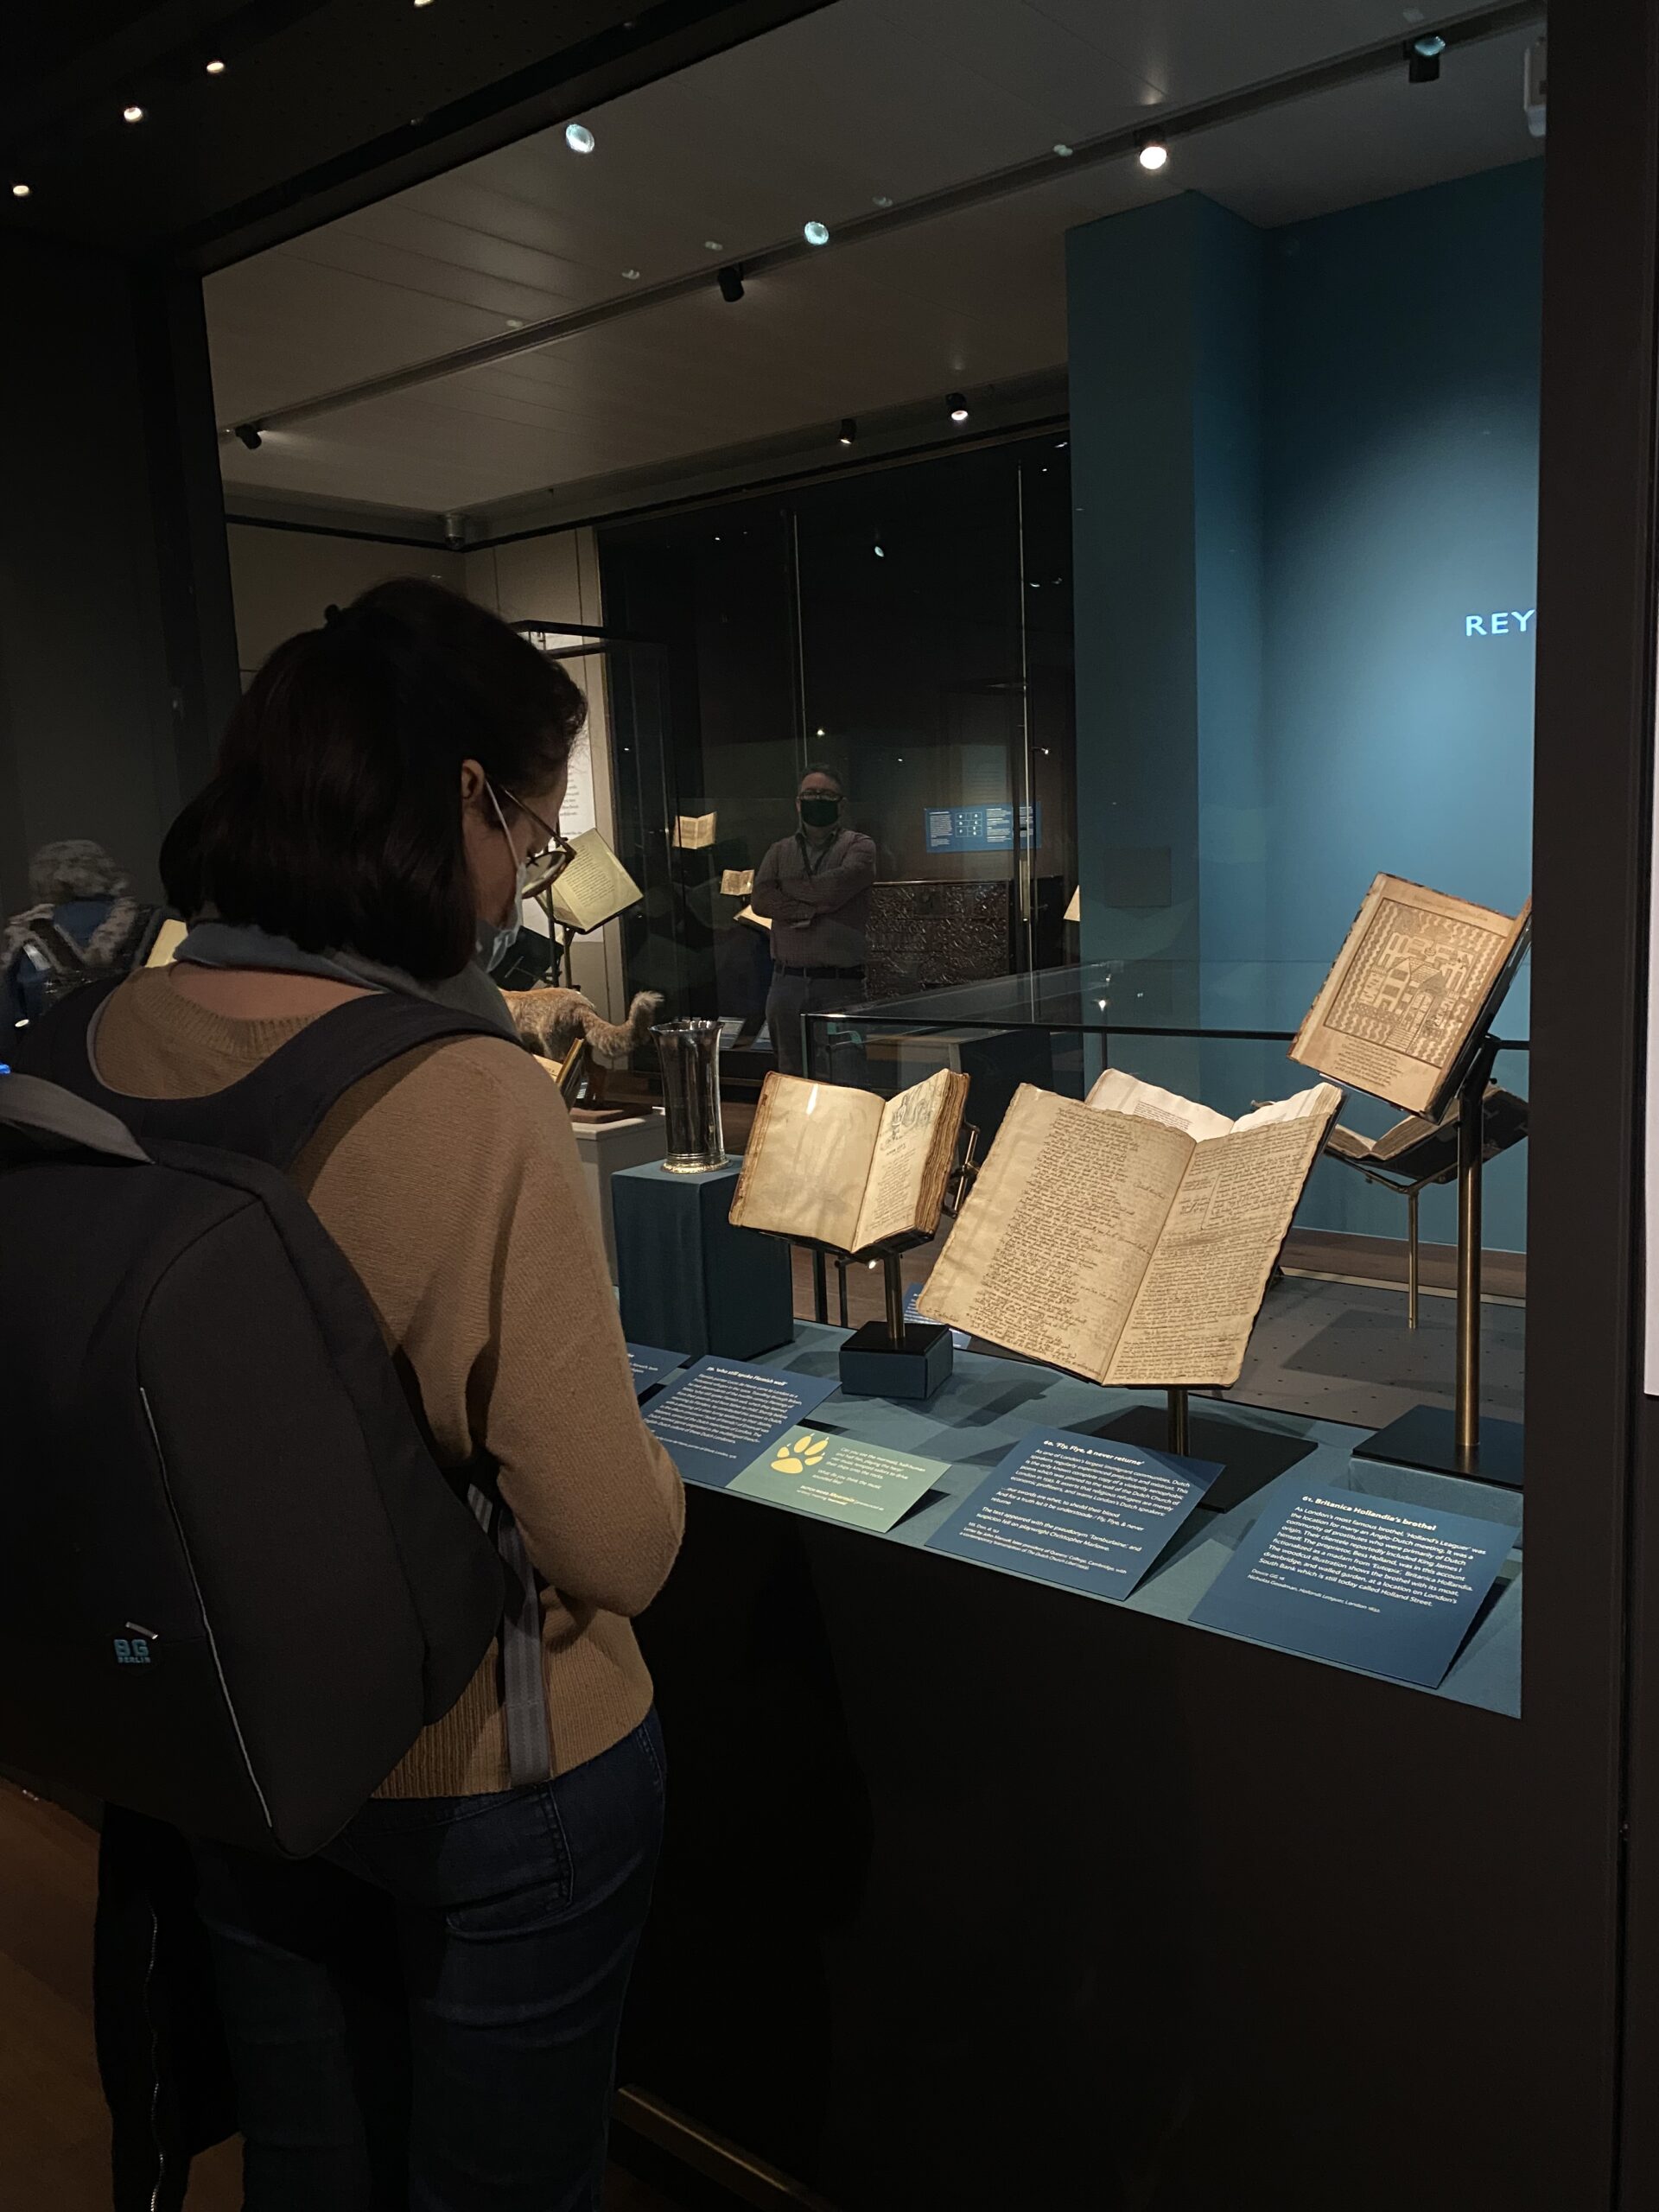 A woman looks at a display case in the Weston Library, Oxford